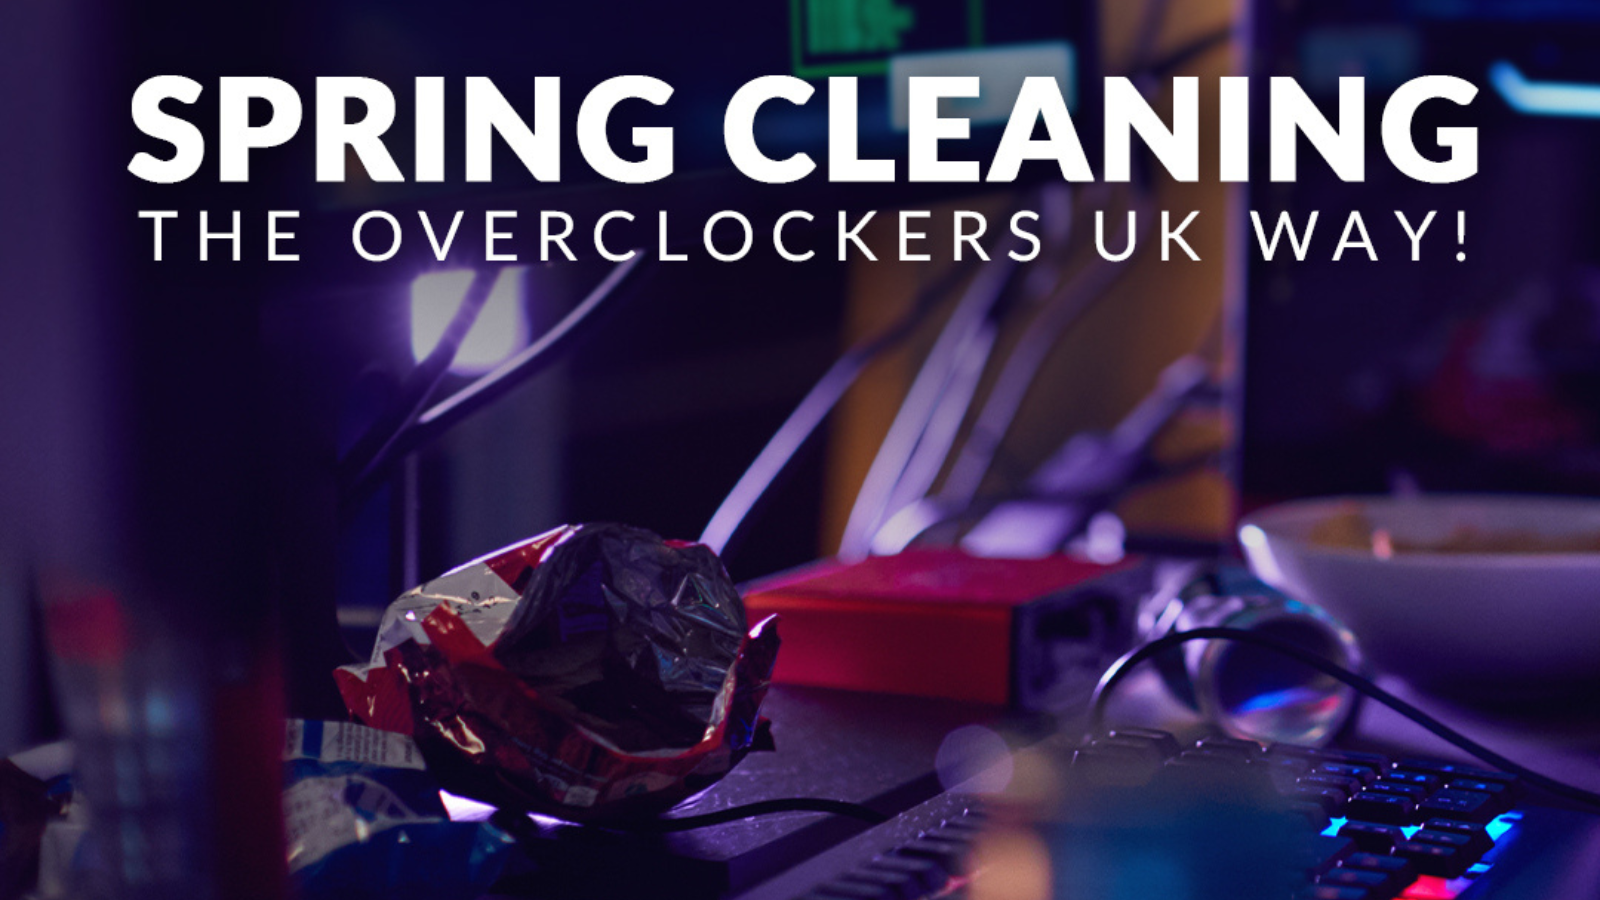 Spring Cleaning the Overclockers UK Way!